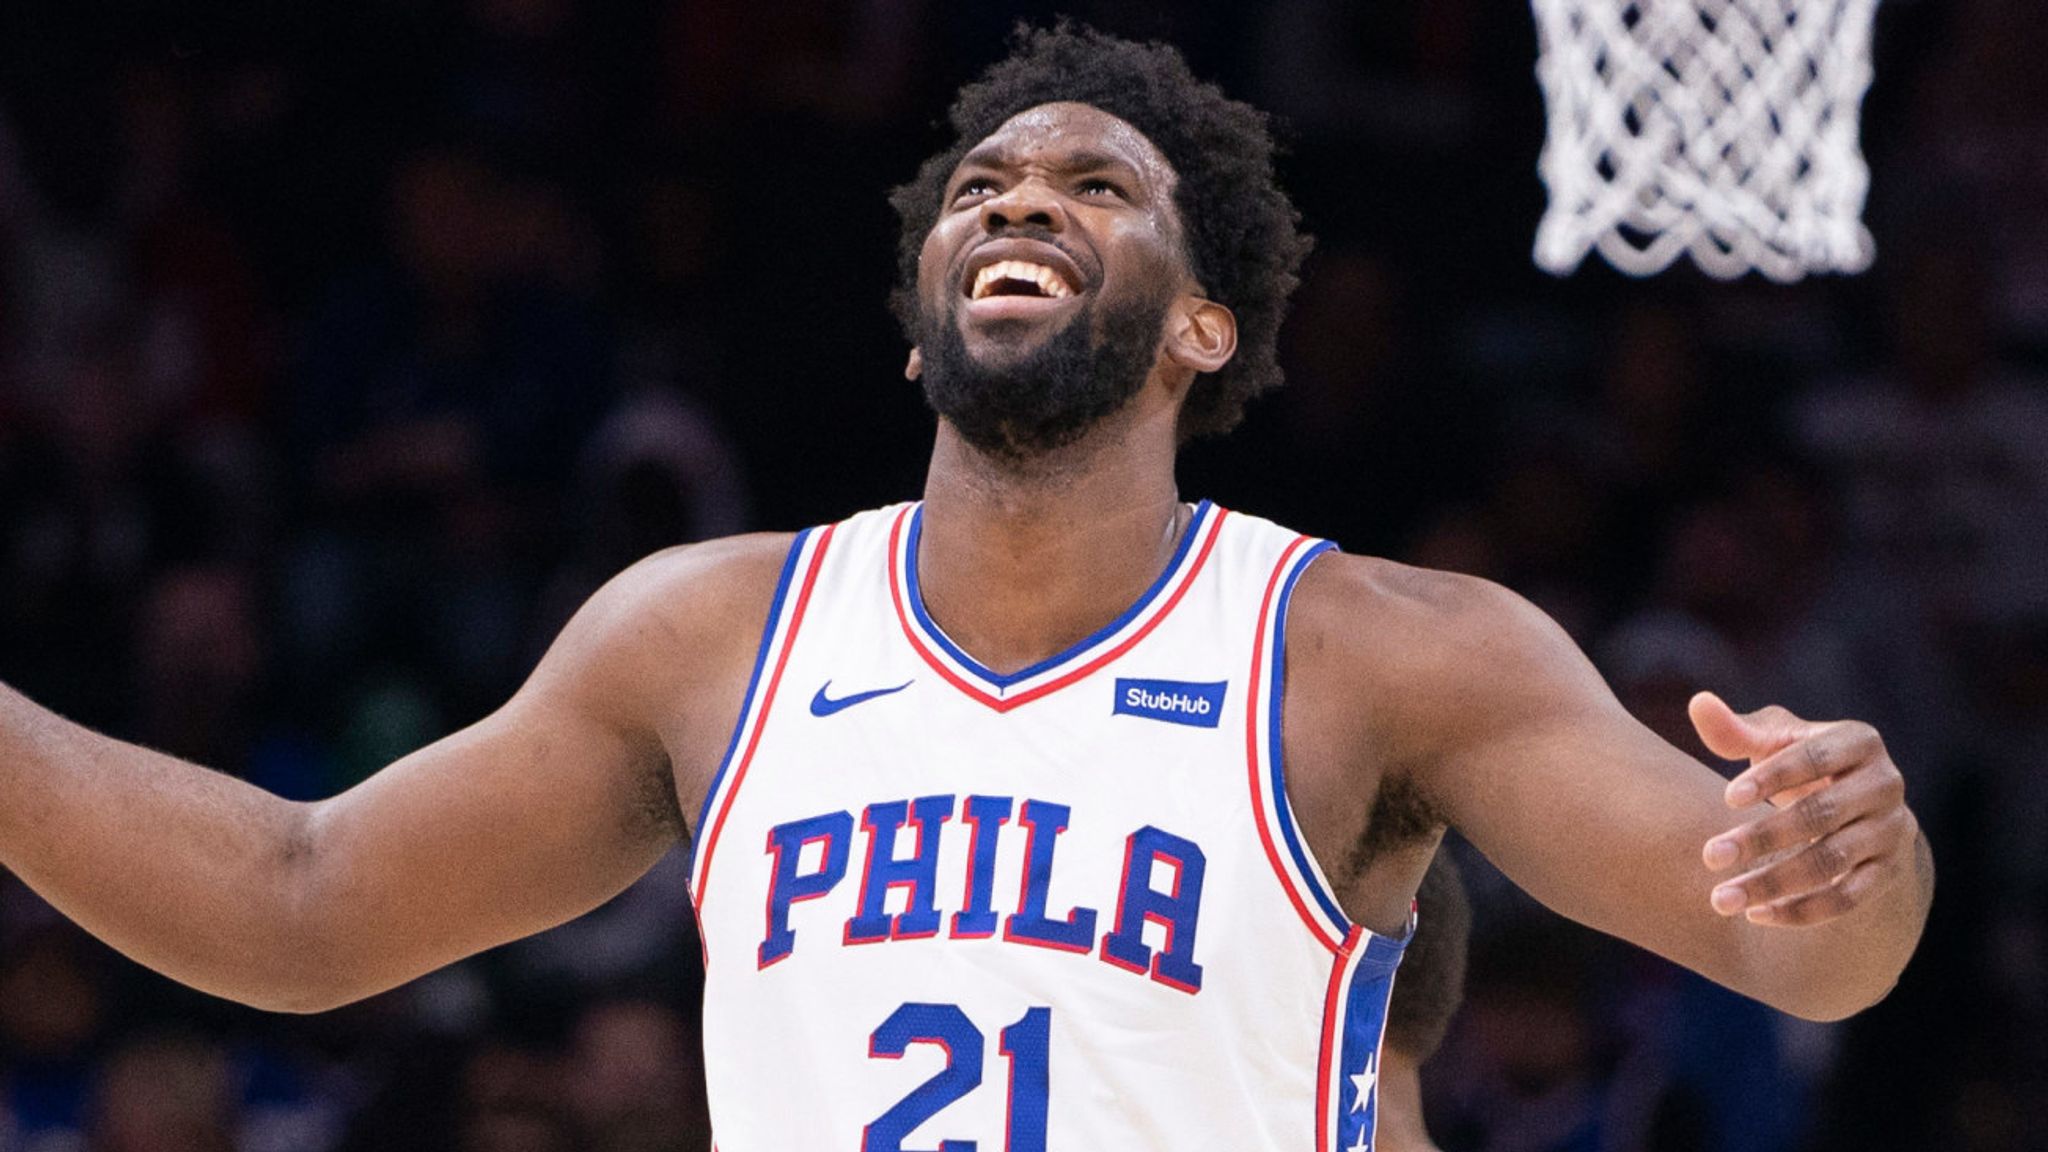 Joel Embiid, Ben Simmons lead Sixers past Nets – The Morning Call